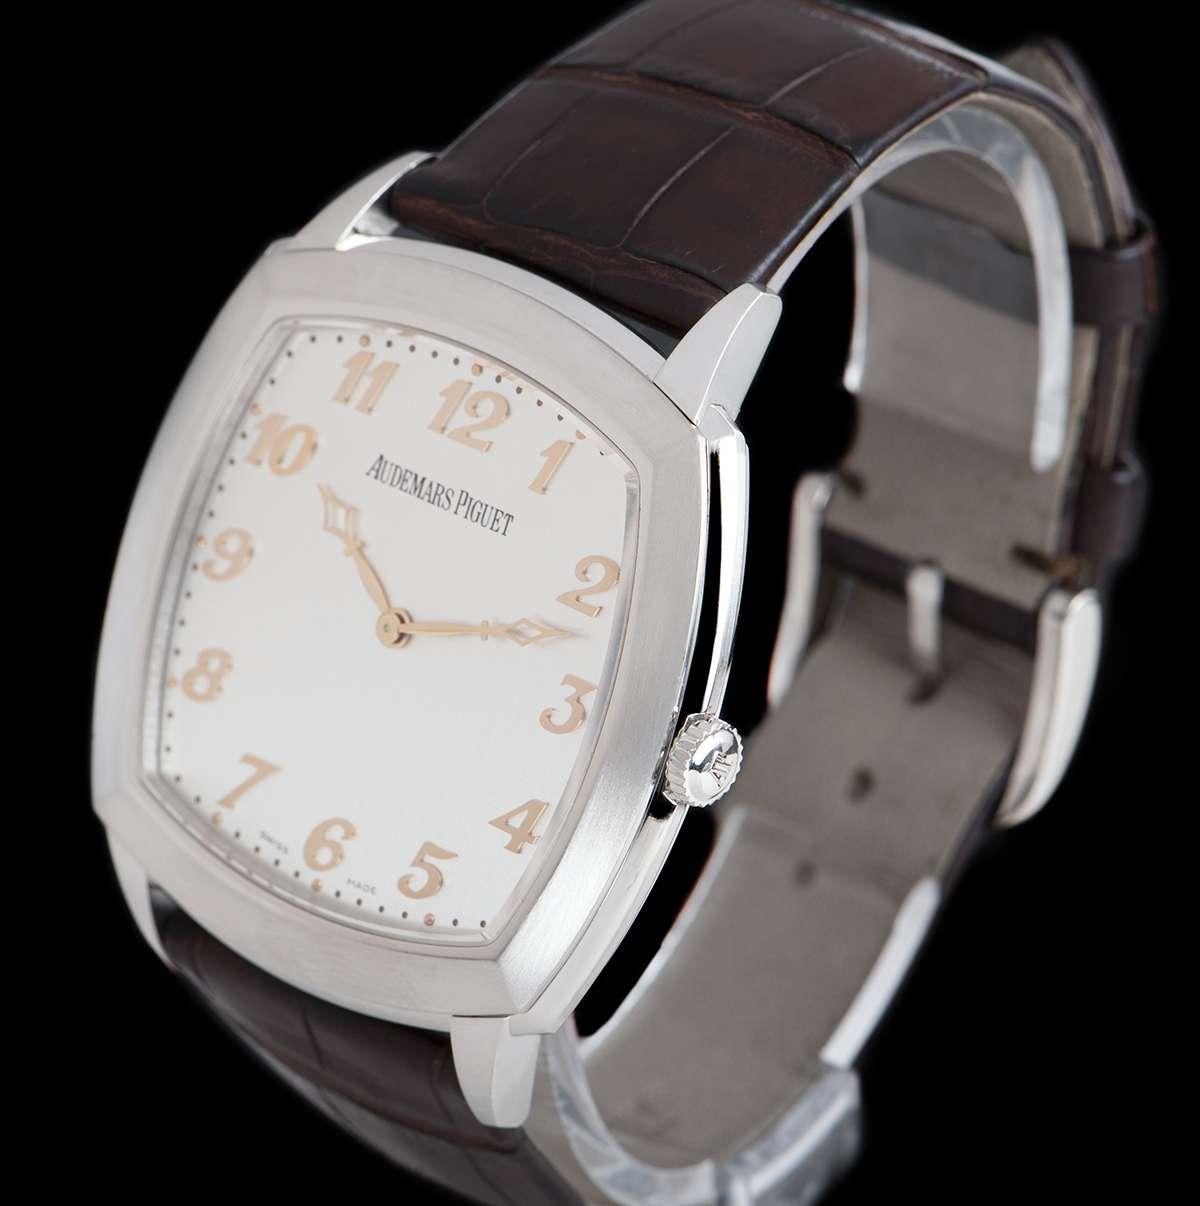 A Platinum Tradition Extra-Thin Gents Wristwatch, silver-toned opaline dial with applied arabic numbers, a fixed platinum bezel, an original dark brown leather strap with an original platinum pin buckle, sapphire glass, exhibition caseback,